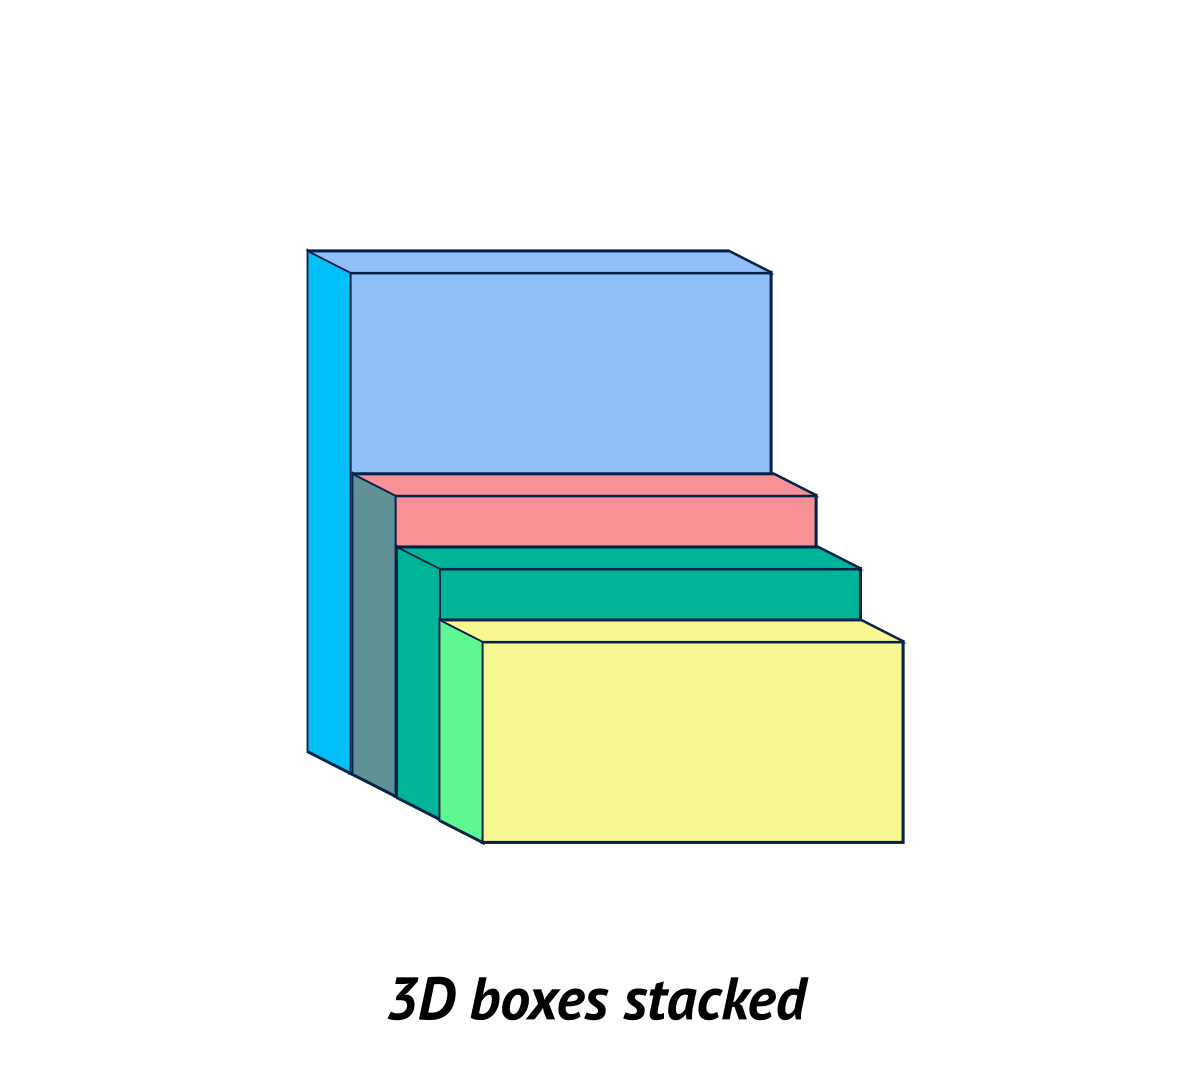 3D Stacked Boxes